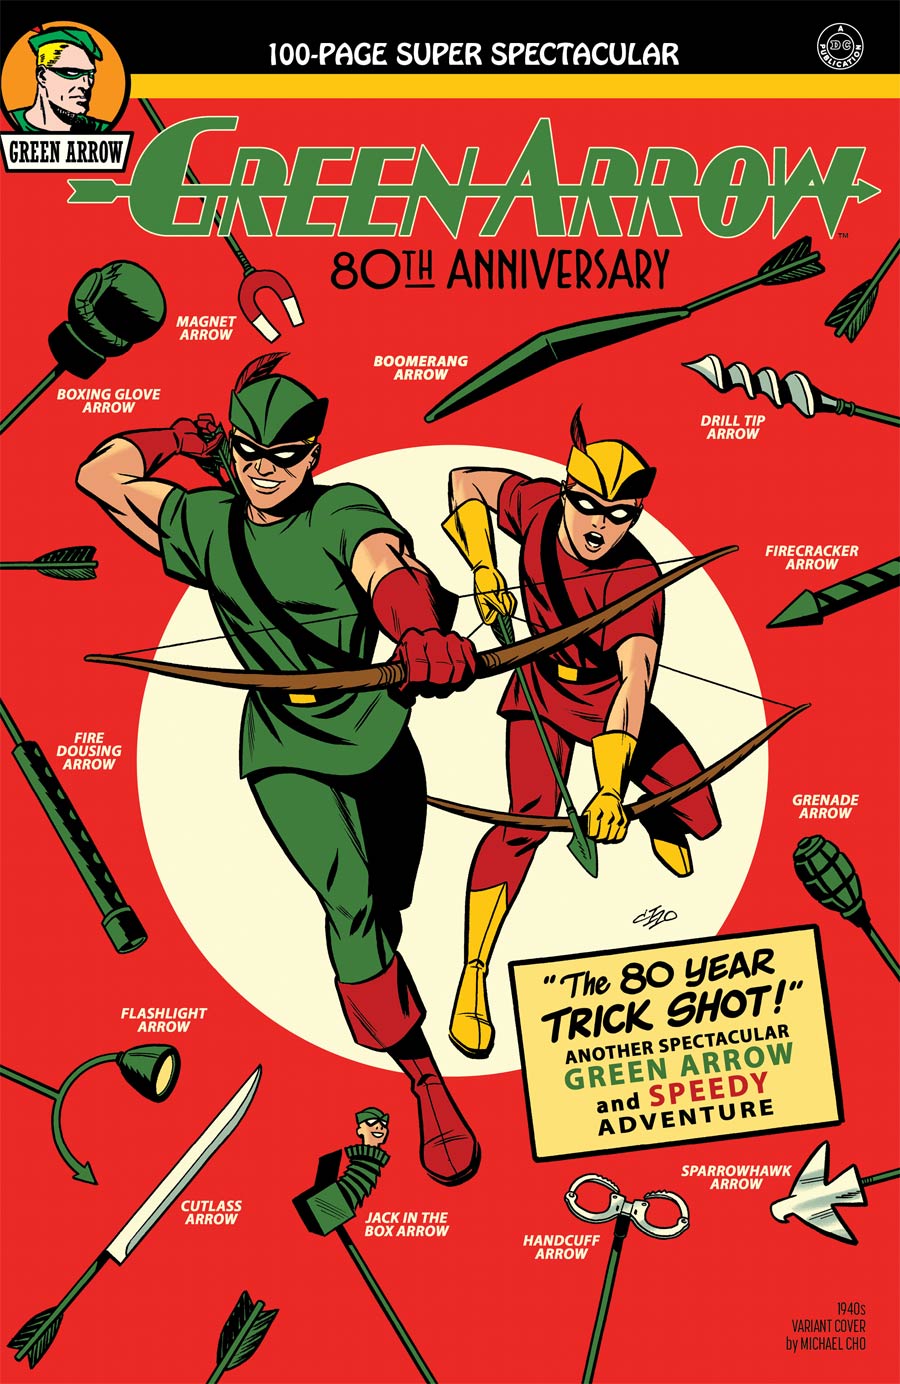 Green Arrow 80th Anniversary 100-Page Super Spectacular #1 (One Shot) Cover B Variant Michael Cho 1940s Cover